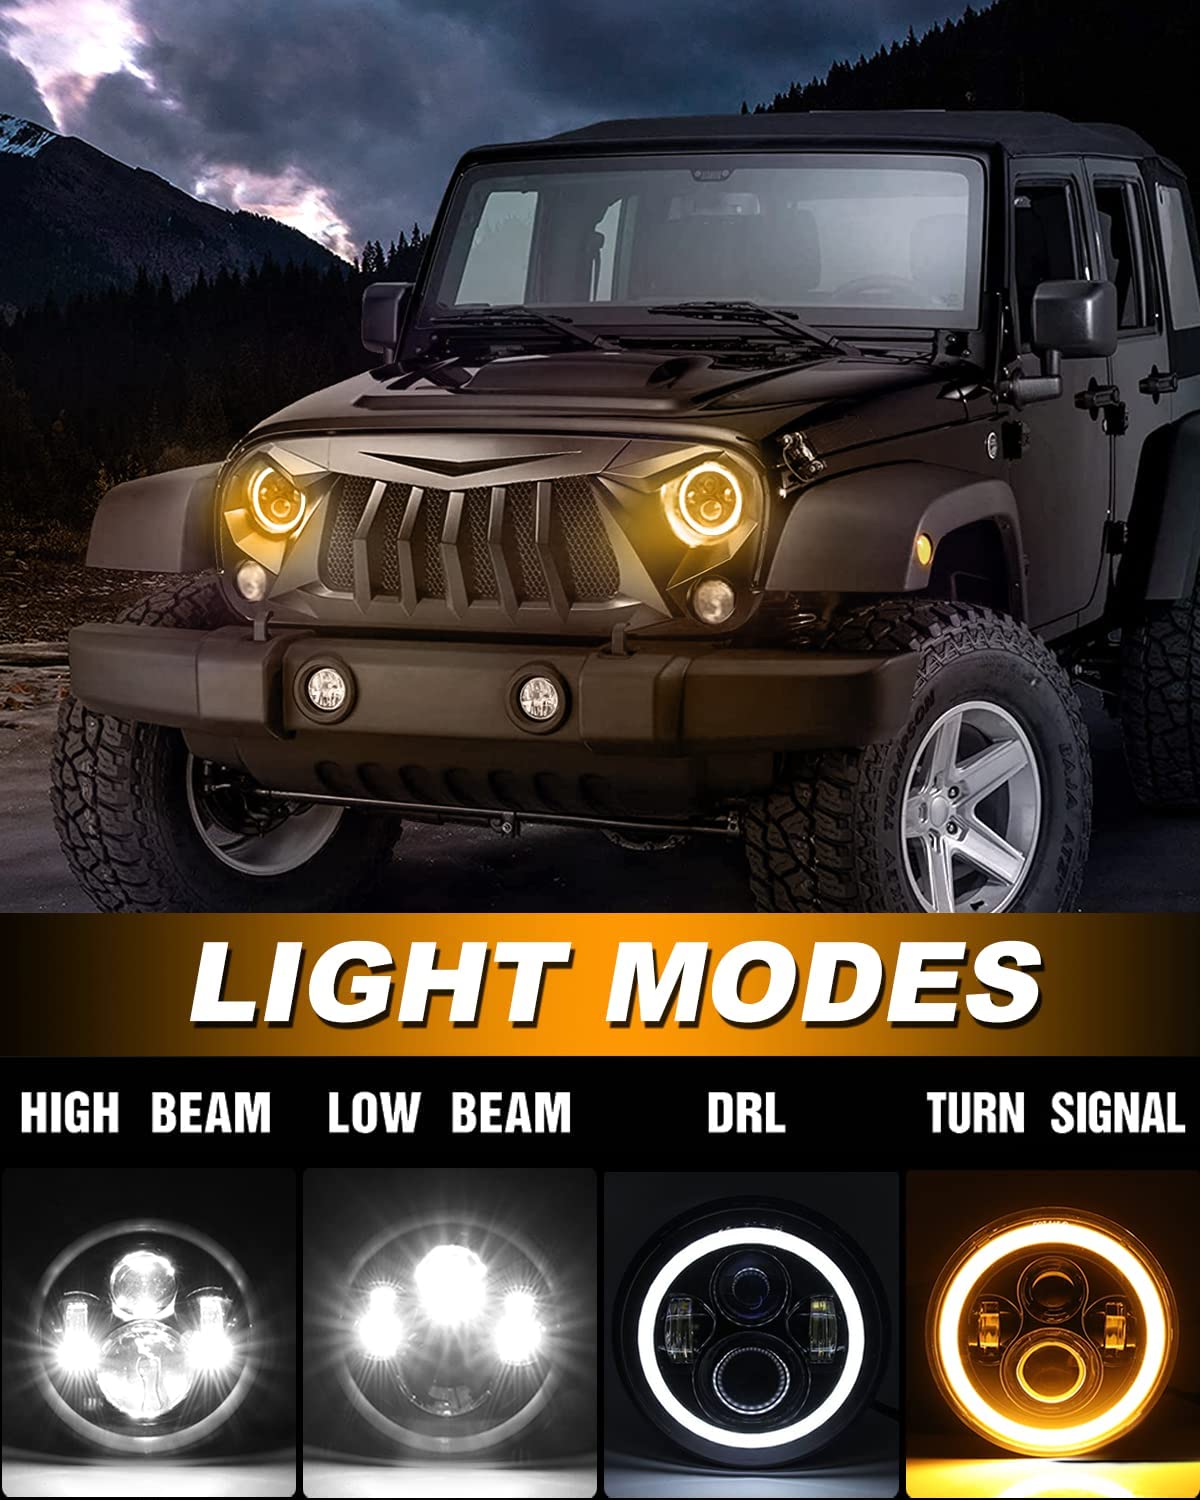 MGLLIGHT 7 Inch Round LED Headlights Halo Angel Eyes DRL Amber Turn Signal Lights H6024 High/Low Sealed Beam LED Headlights Compatible with Jeep Wrangler JK LJ CJ TJ with H4 H13 Adapter, 2PCS